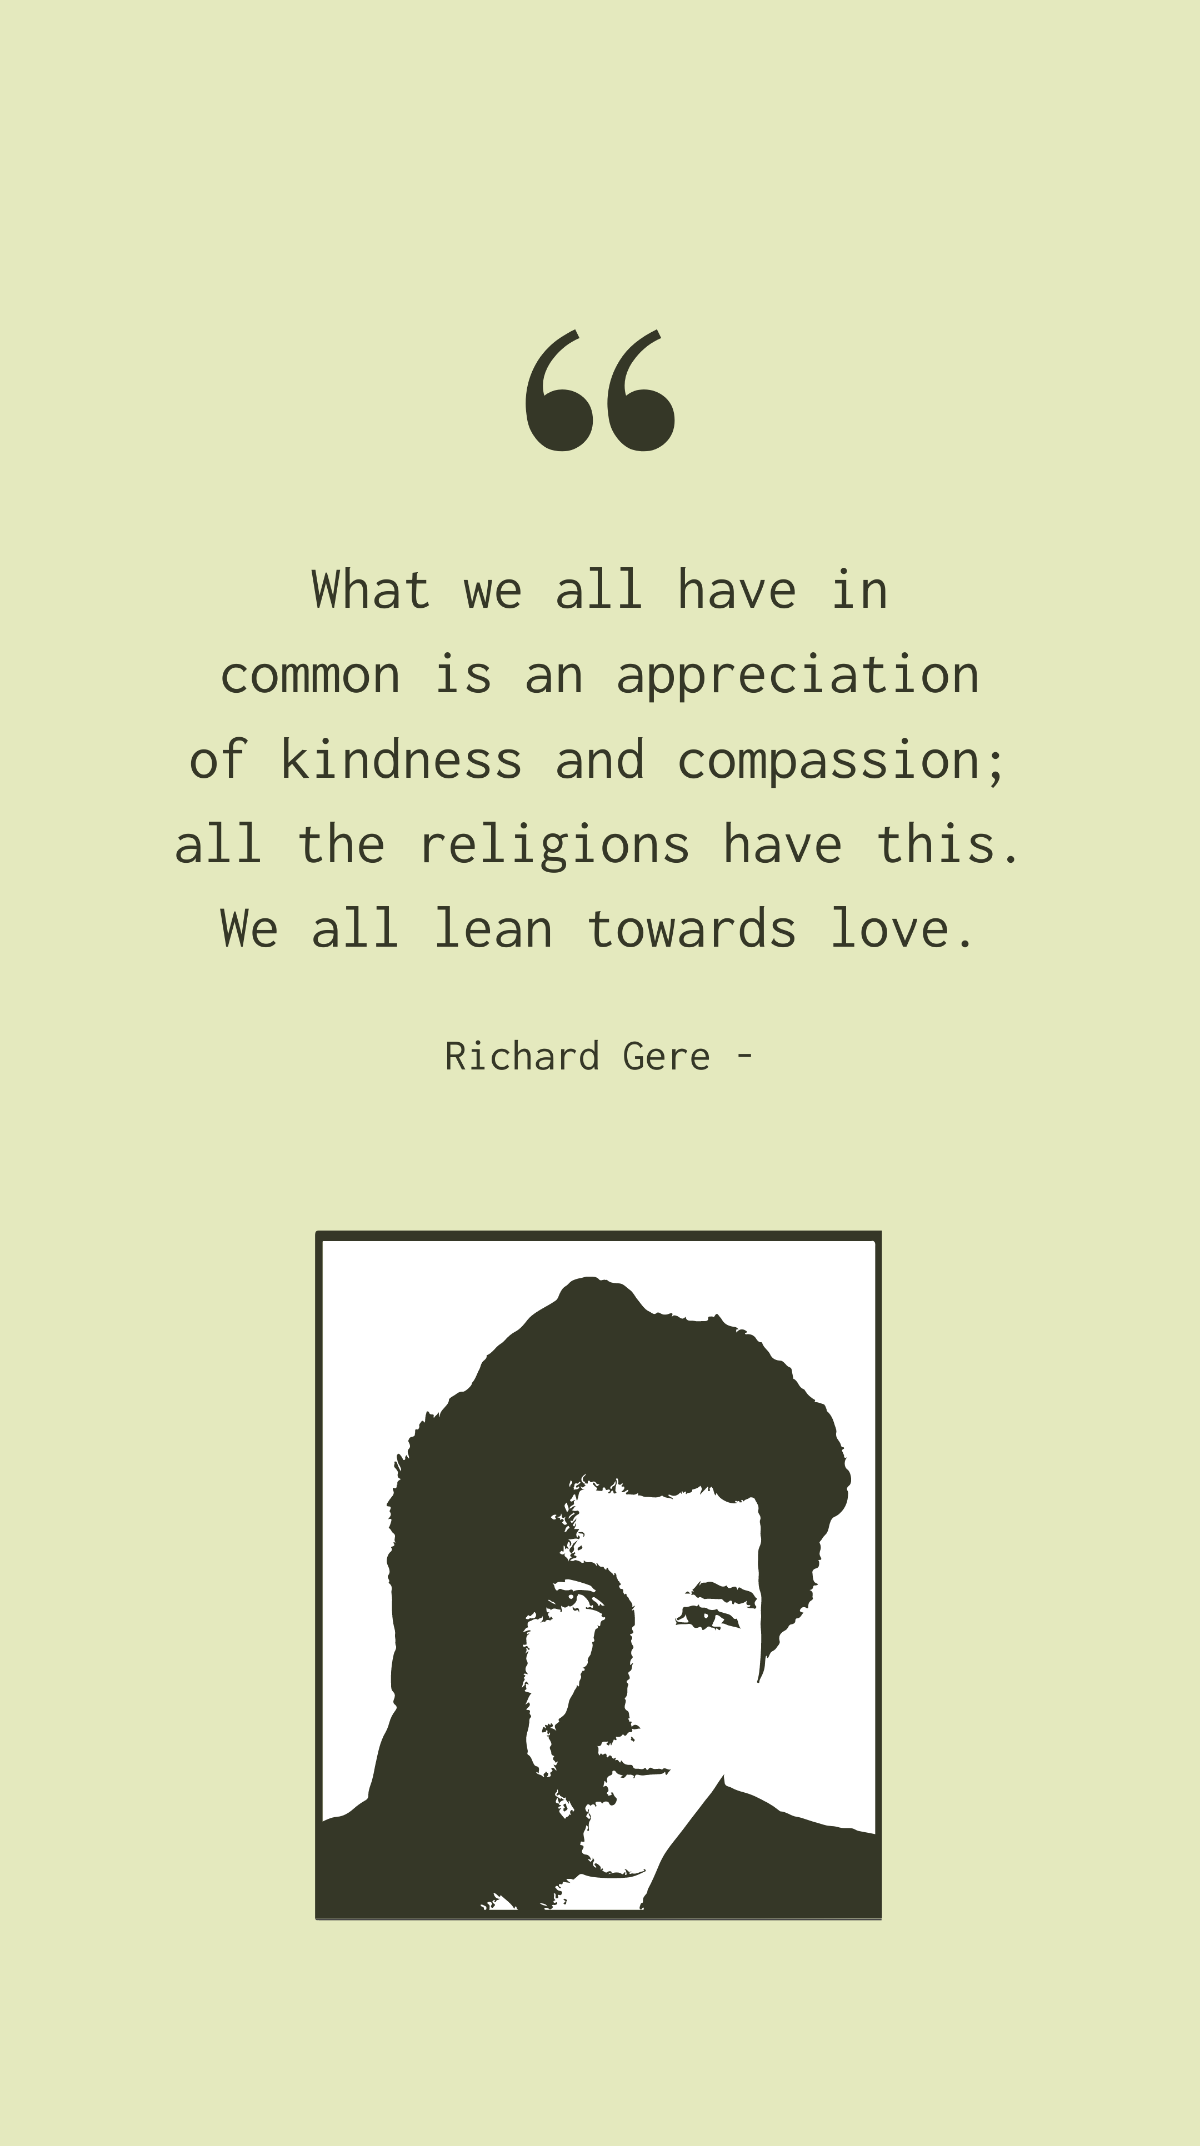 Free Richard Gere - What we all have in common is an appreciation of kindness and compassion; all the religions have this. We all lean towards love. Template